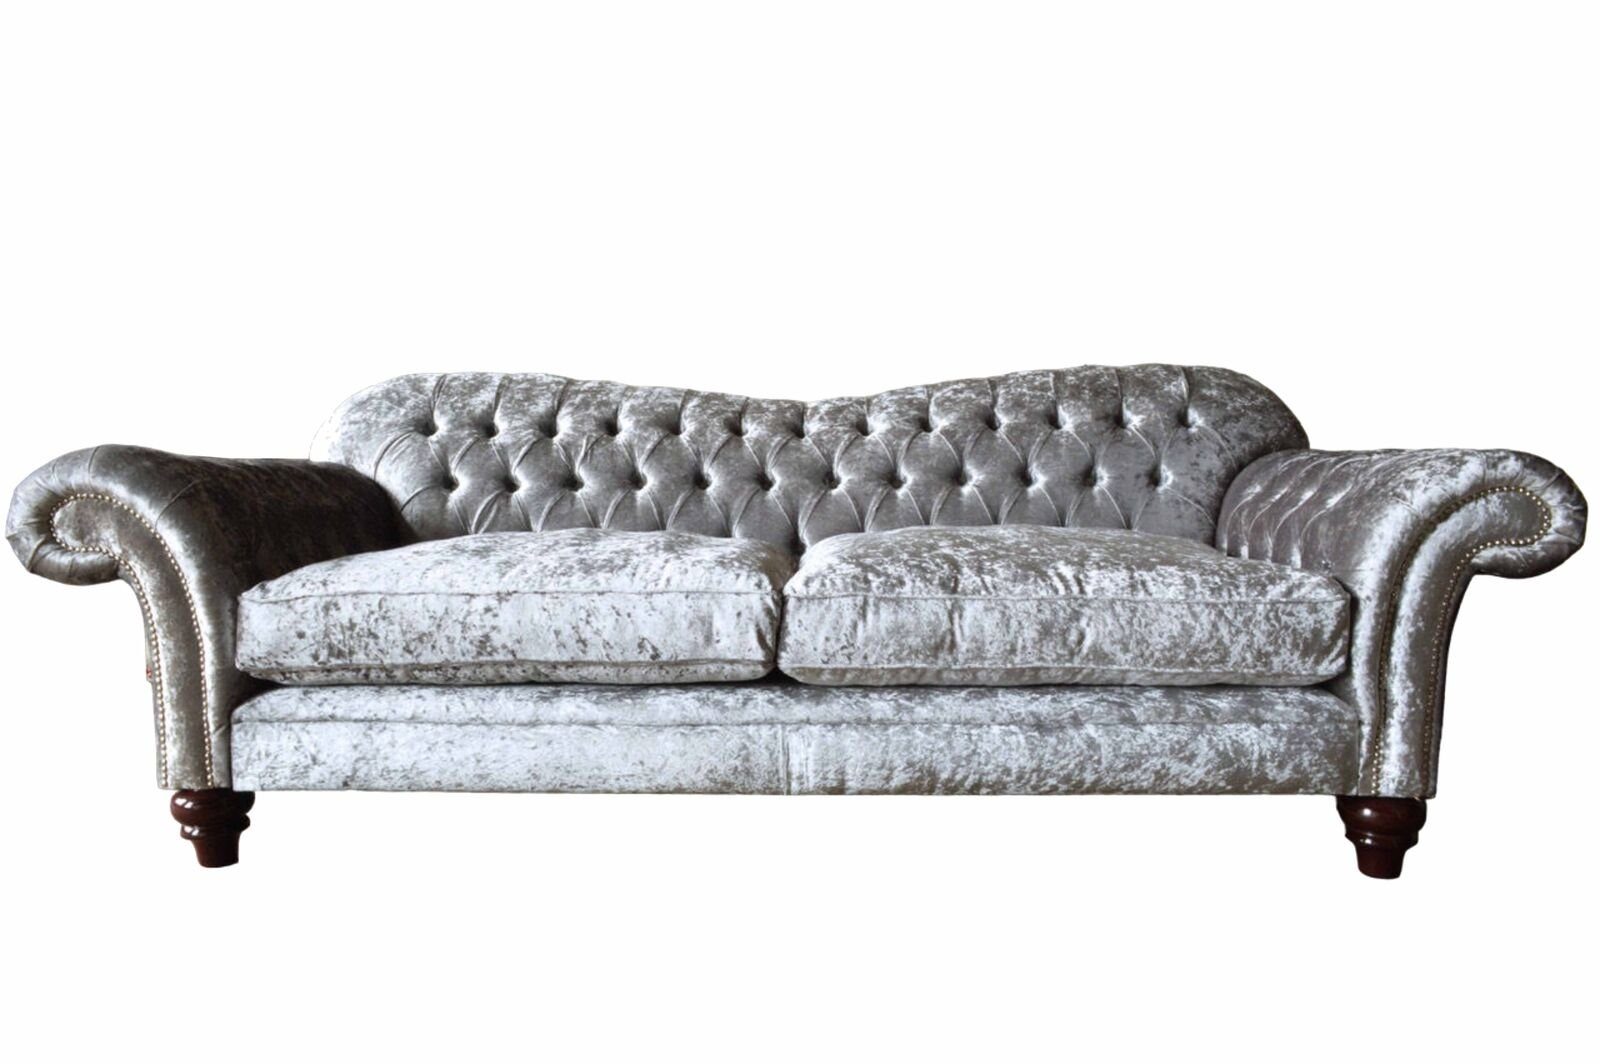 JVmoebel Sitzer Europe 3 Sofa Couch Chesterfield Made Textil, Design Samt in Grau Sofa